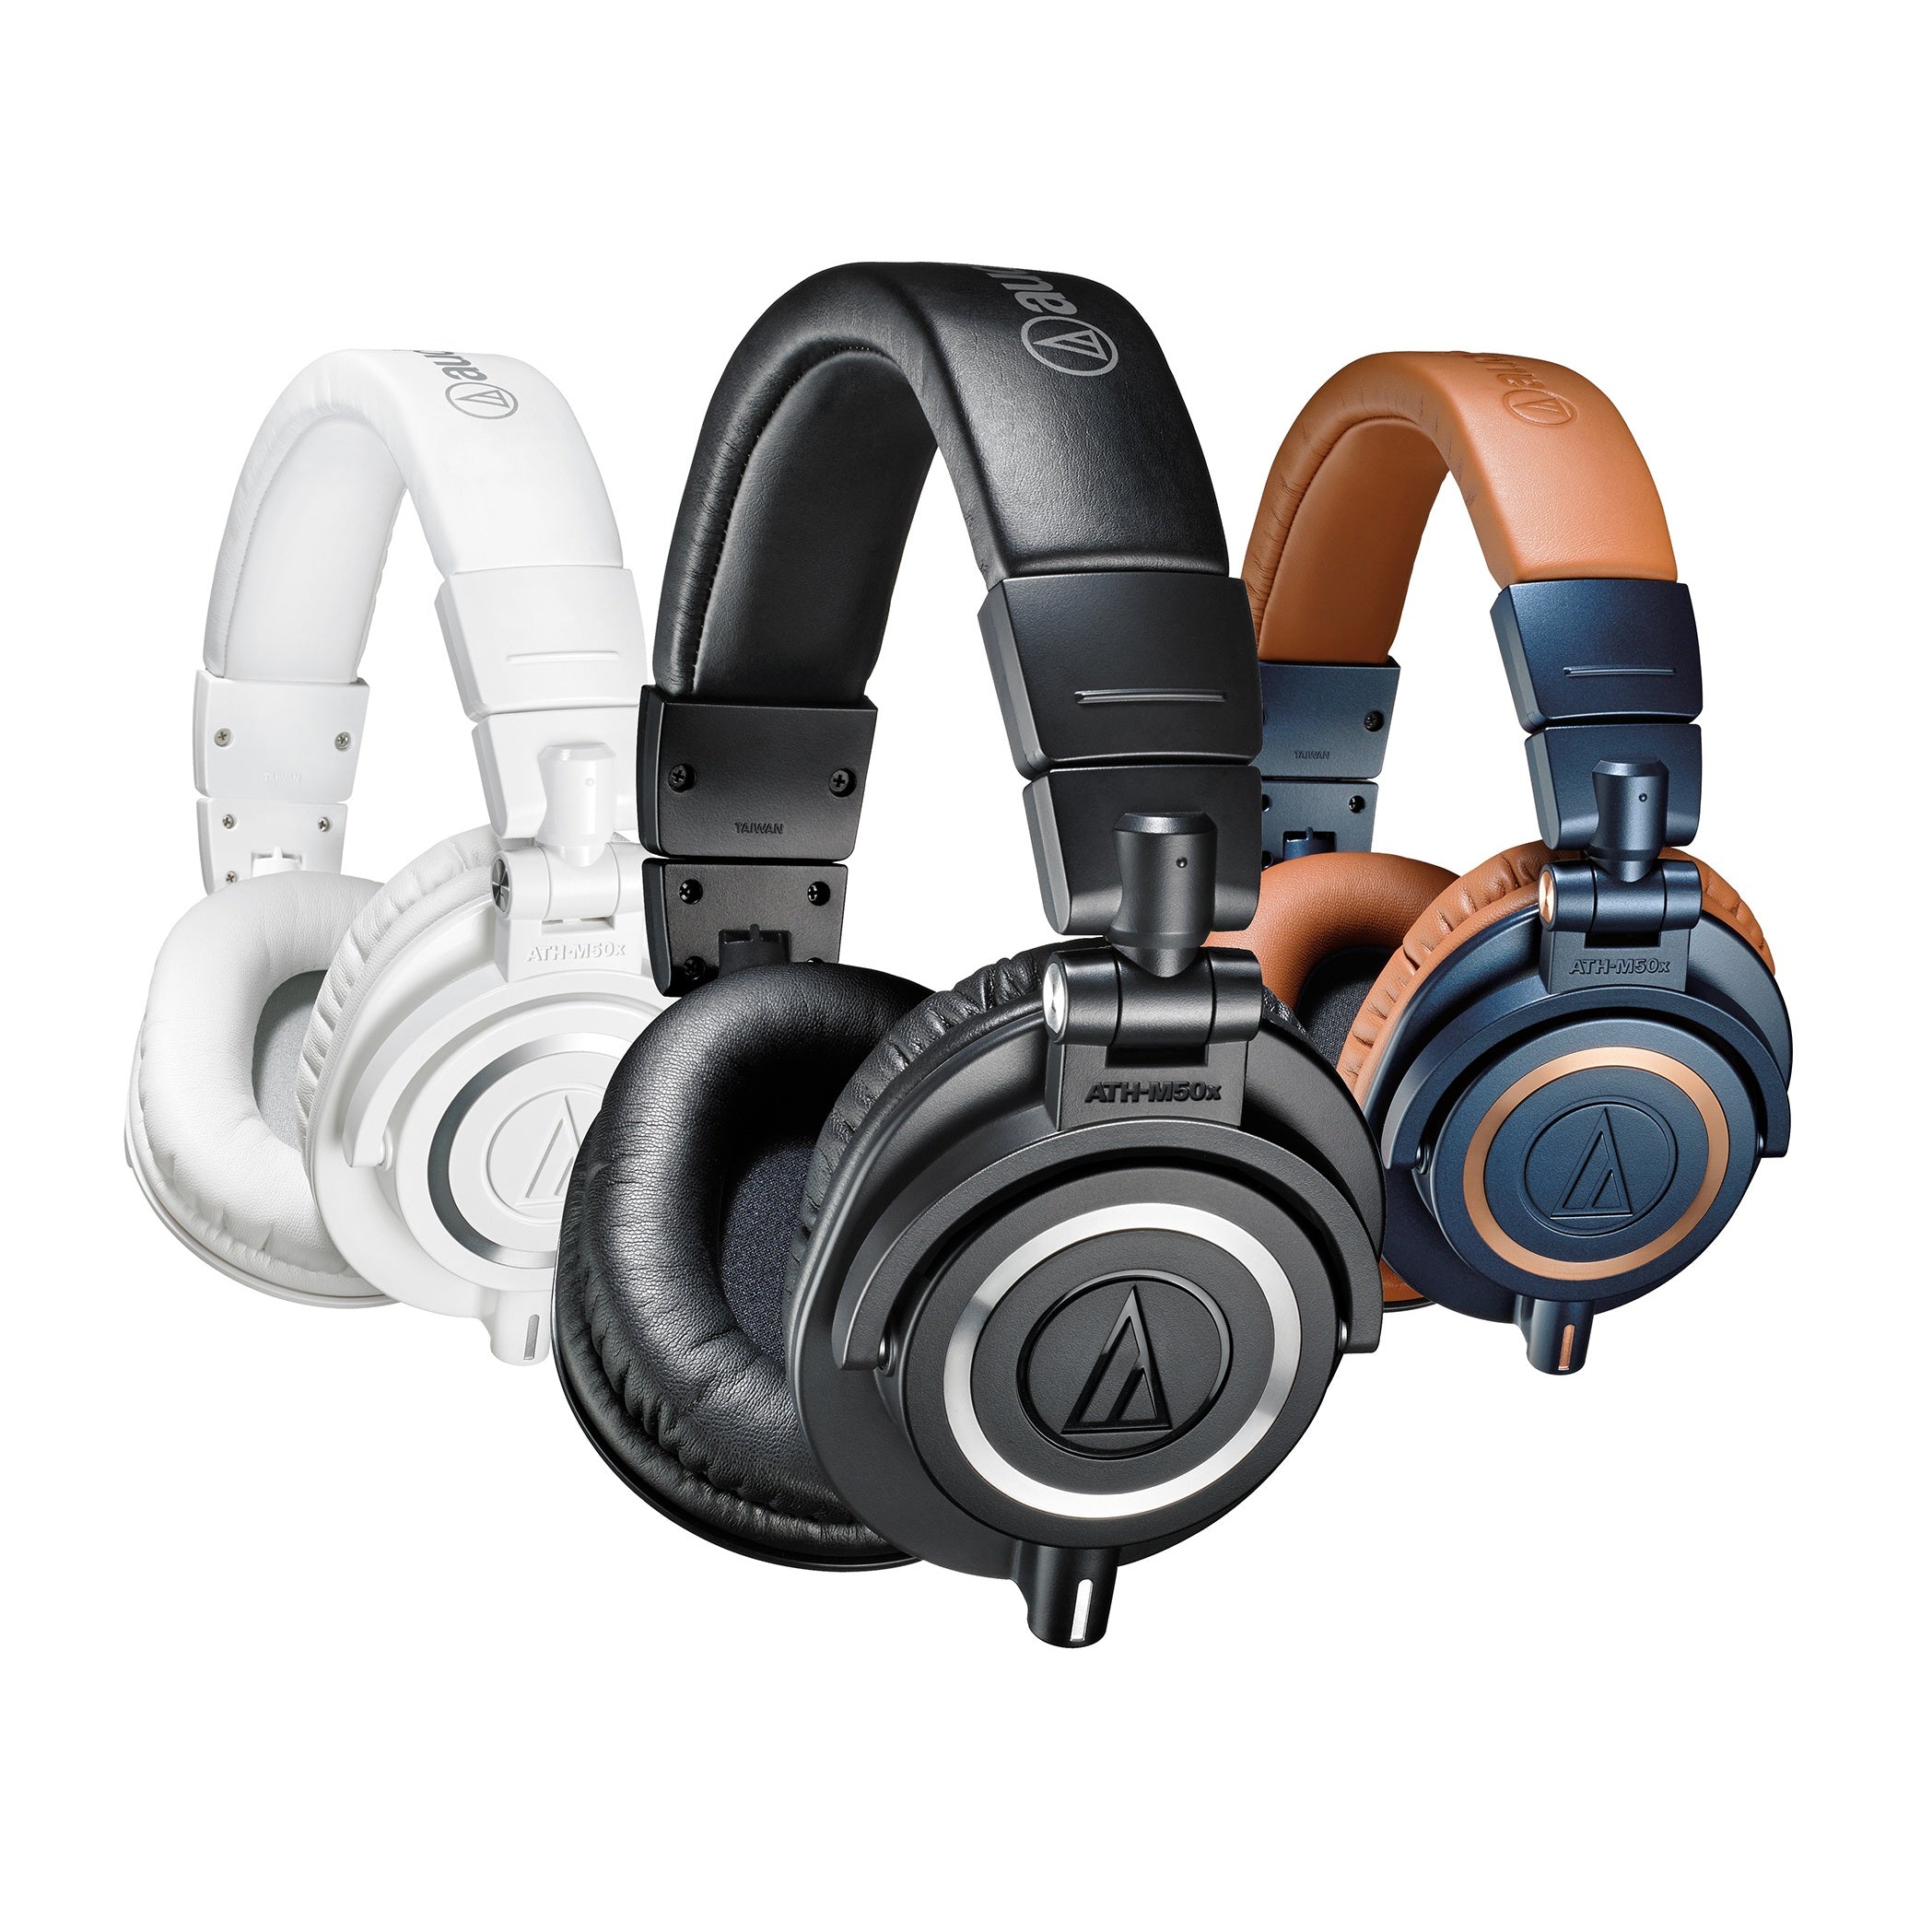 Top 5 Reasons To Buy The Audio-Technica ATH-M50x